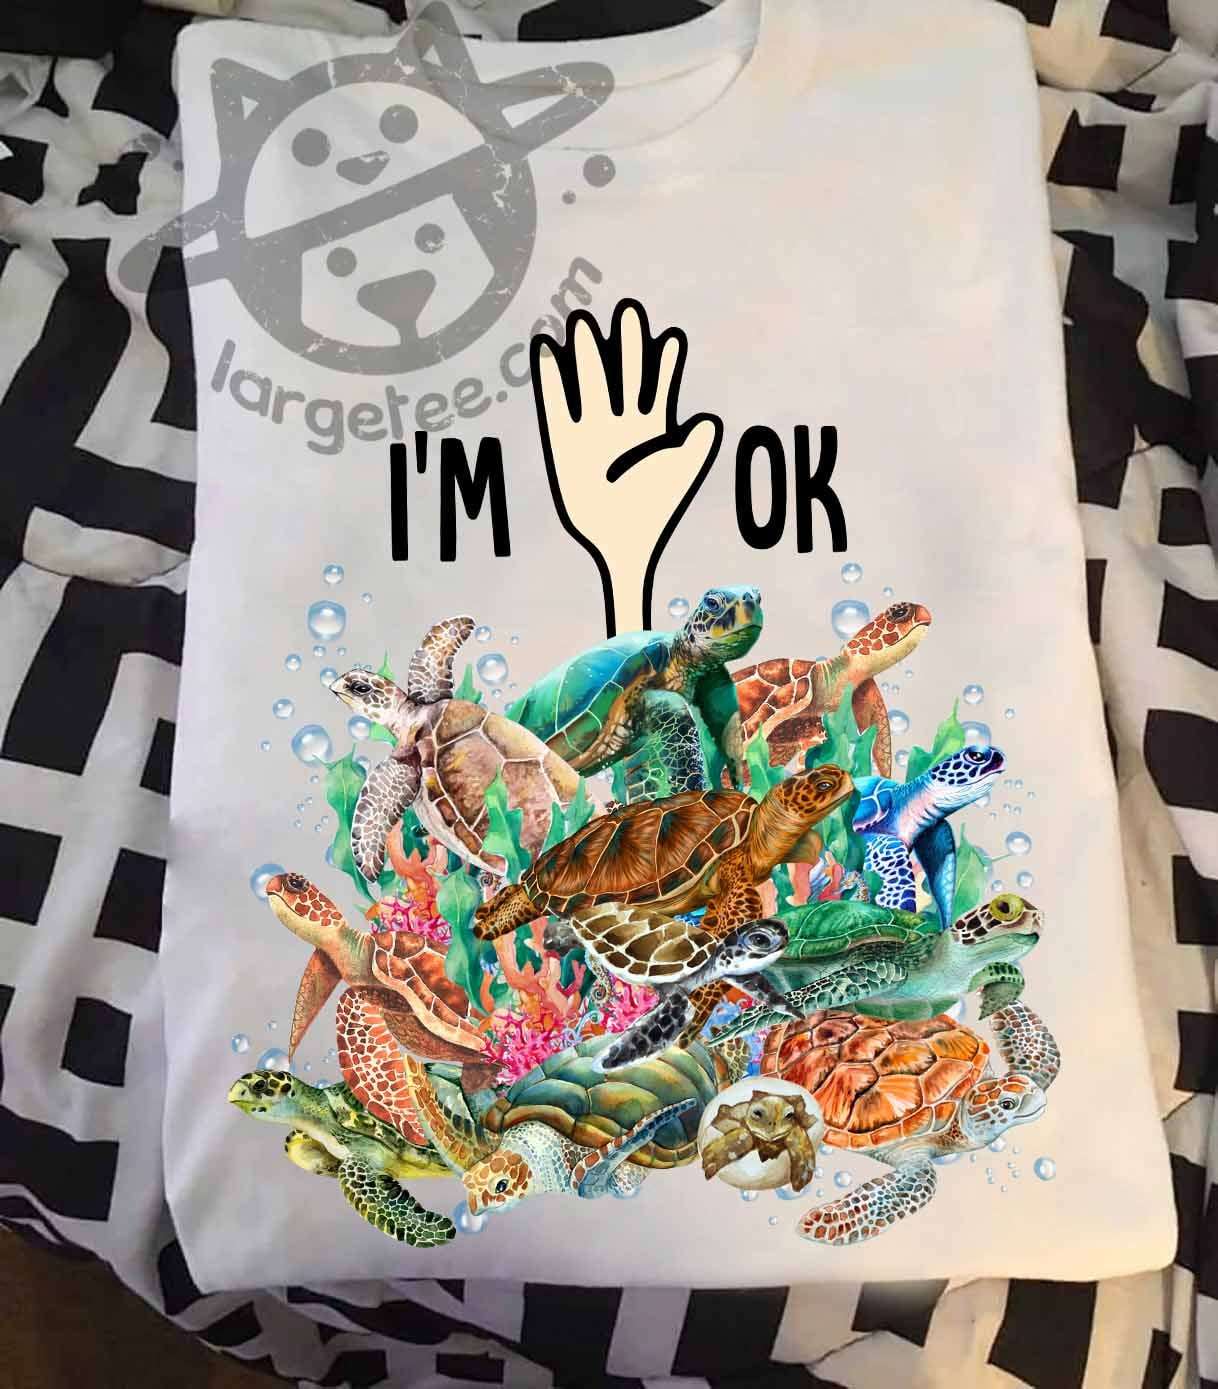 I'm ok - Gift for turtle lover, deep in ocean turtle